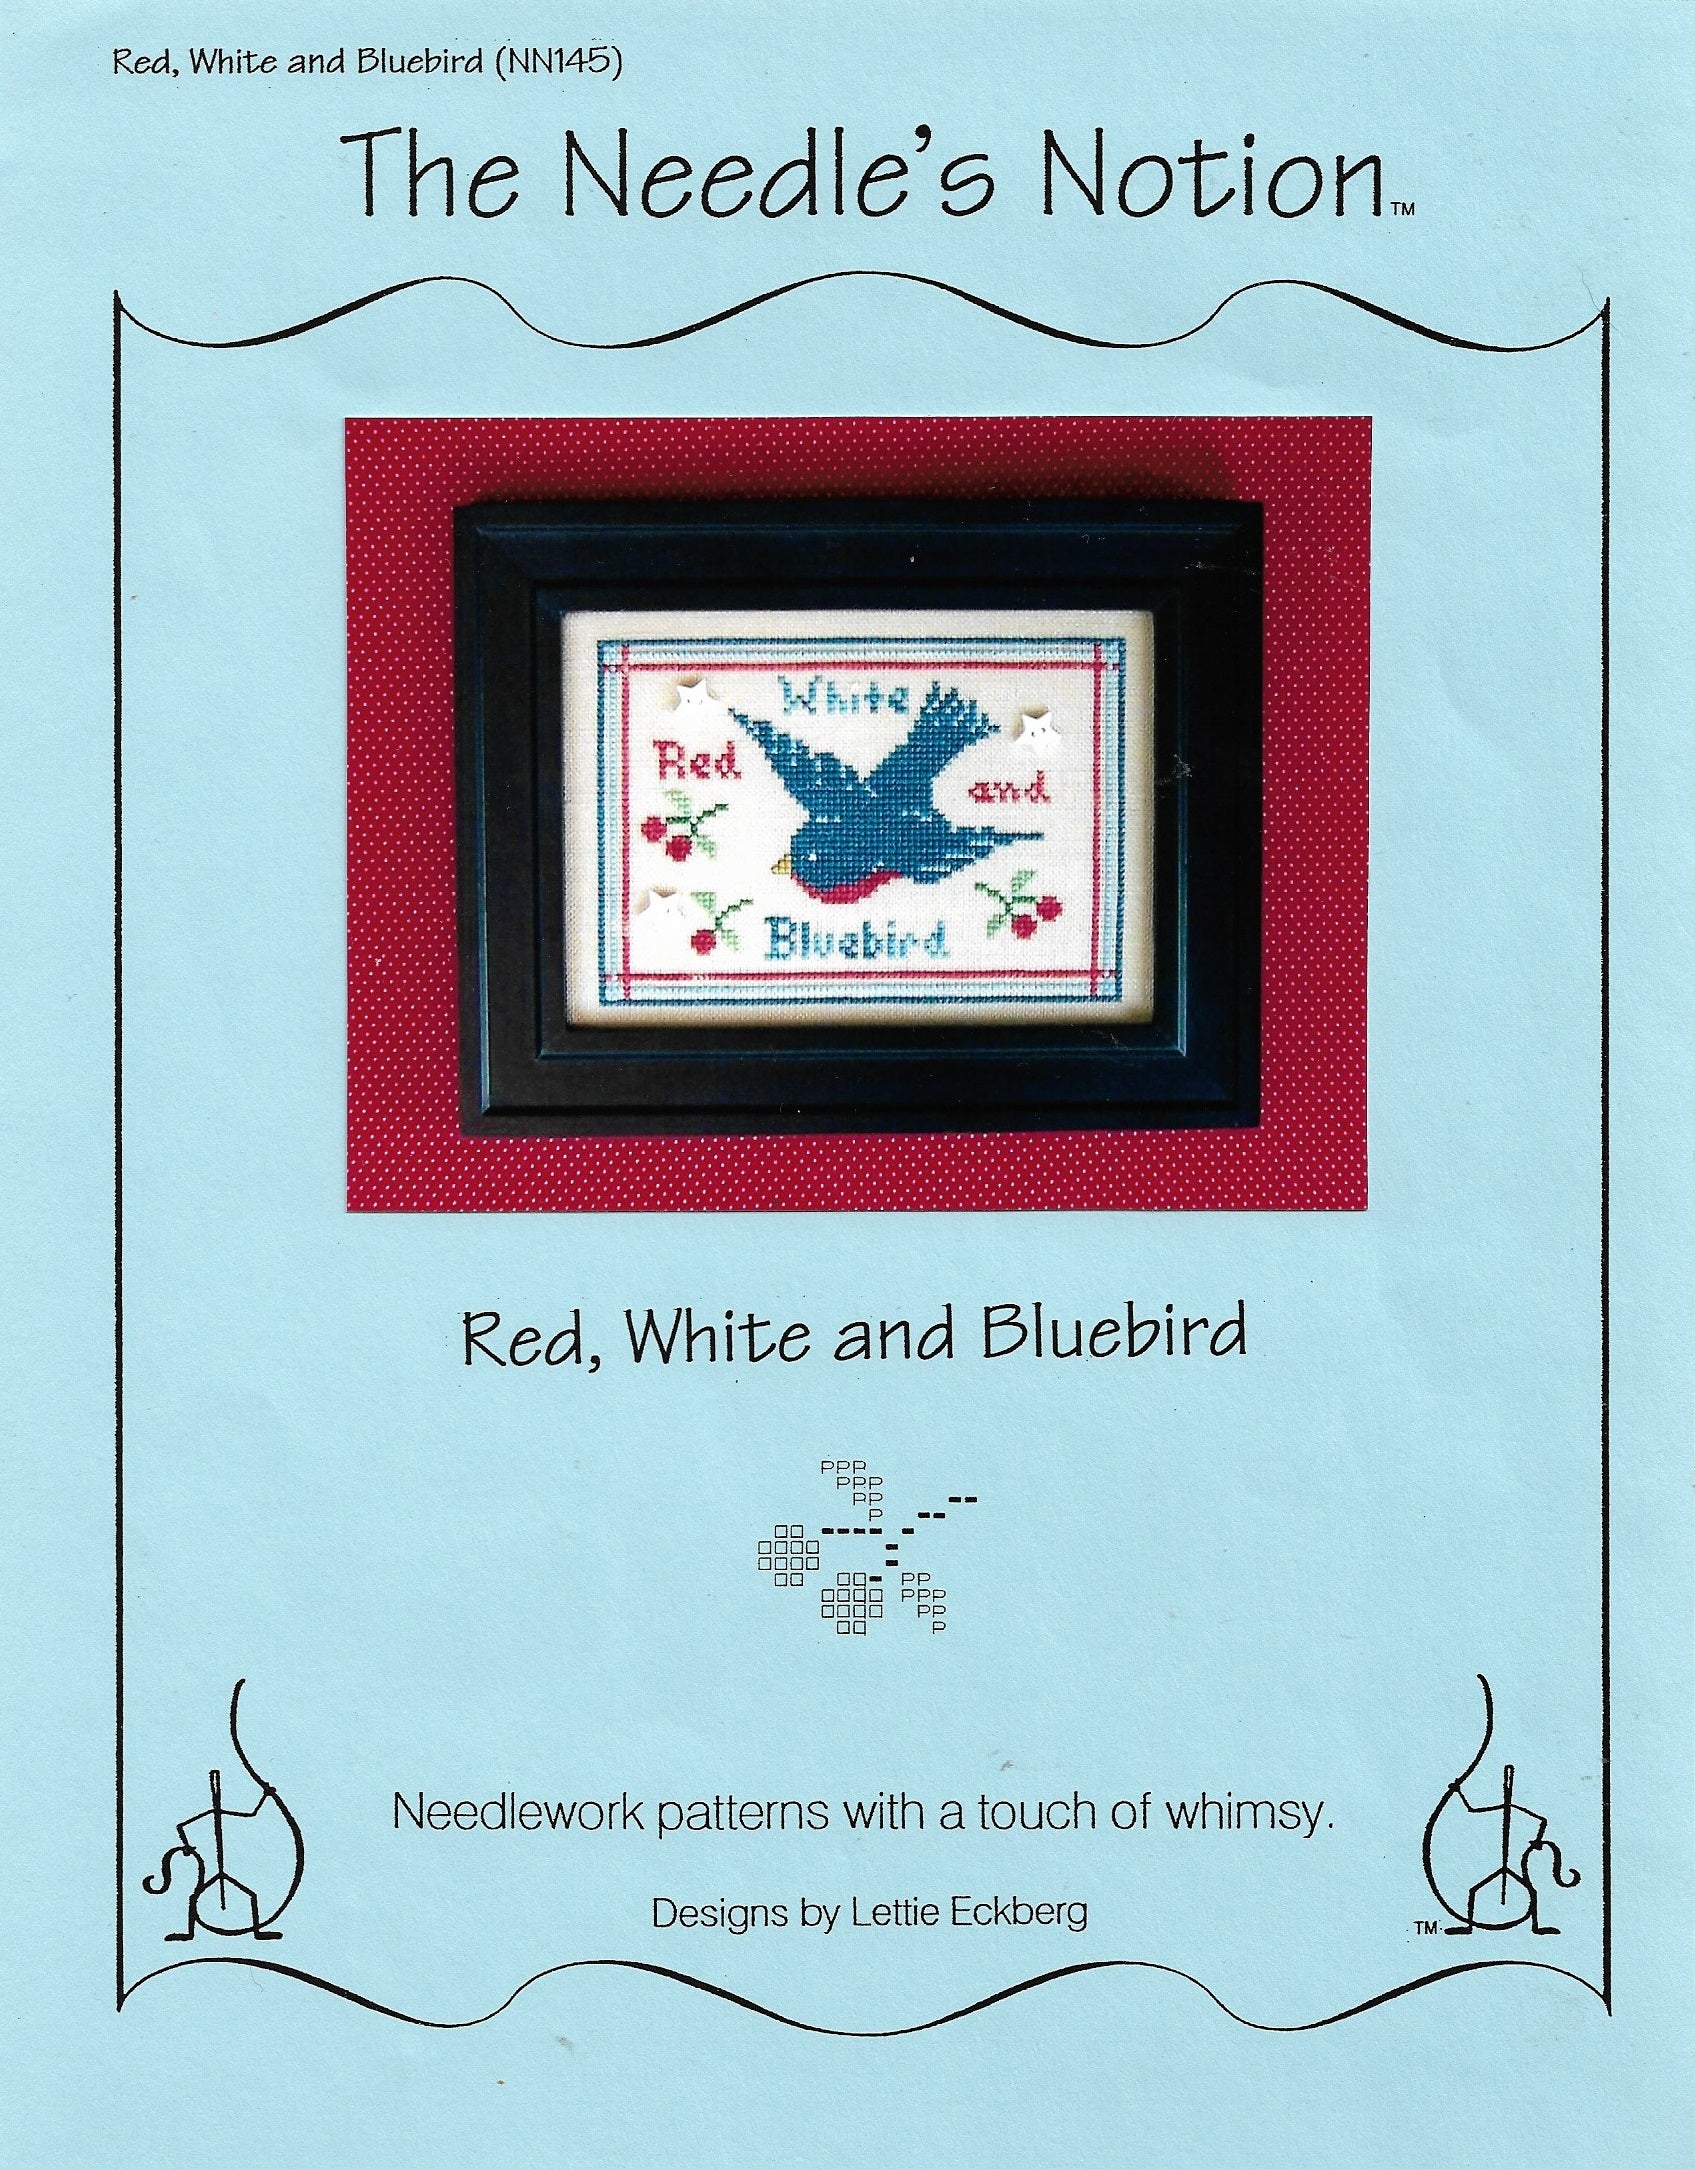 The Needle's Notion Red, White and Bluebird patriotic cross stitch pattern